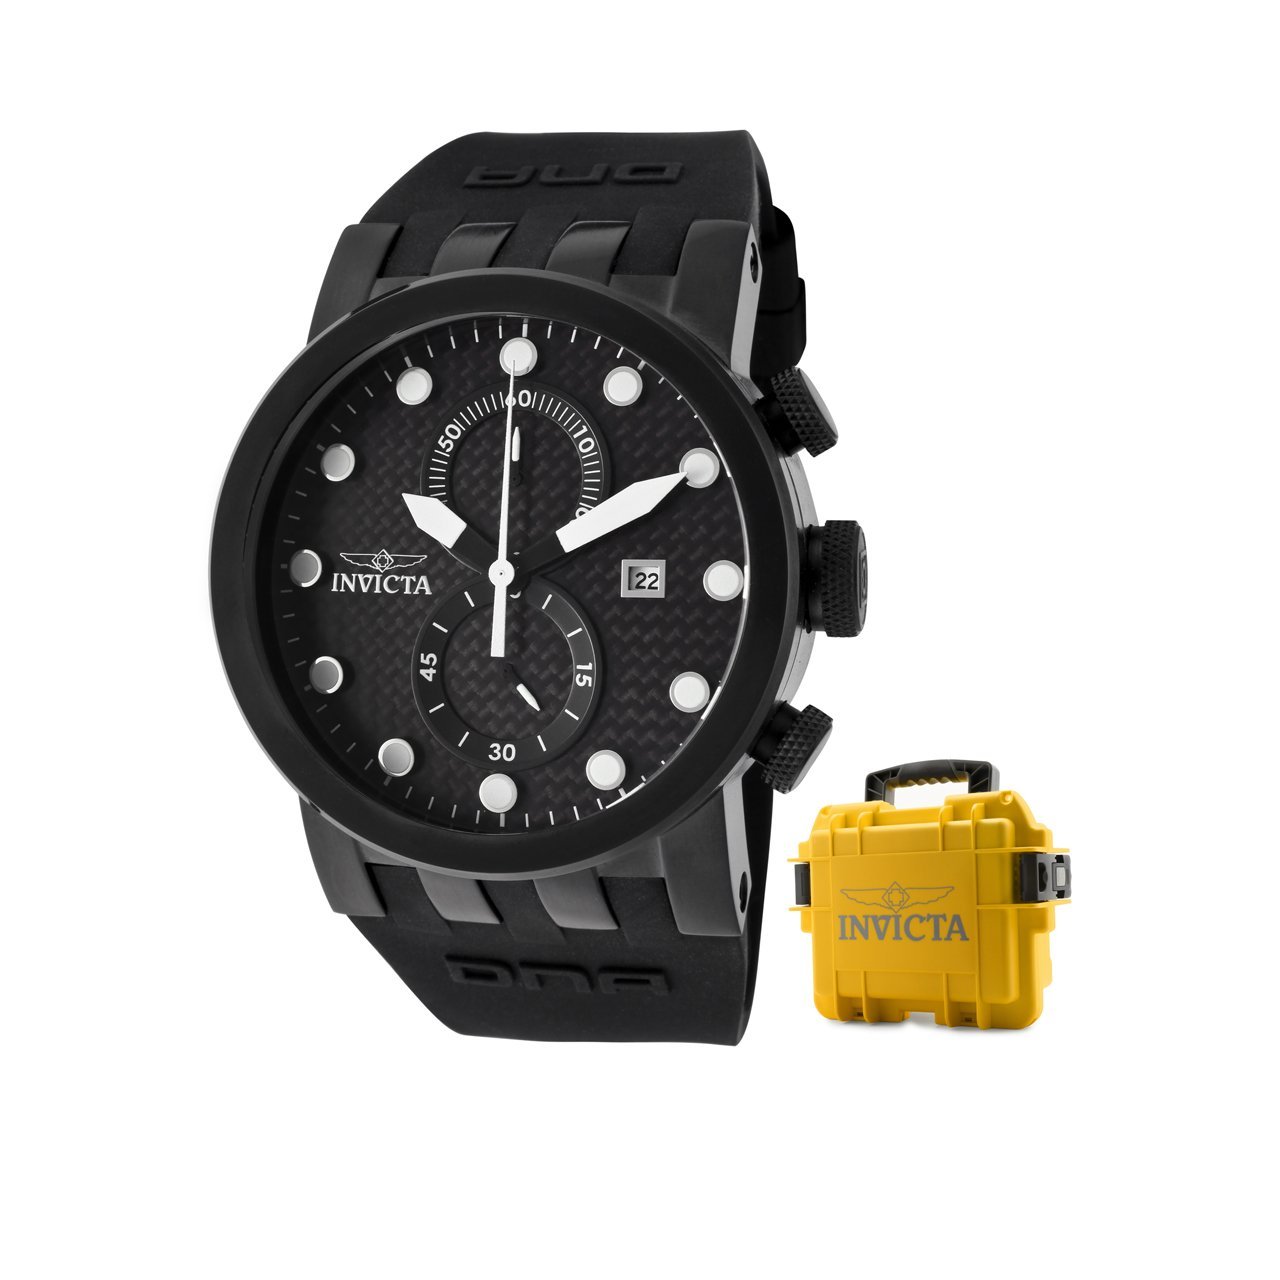 Invicta Men's 10427X DNA Racer Chronograph Black Carbon Fiber Dial Black Silicone Watch with Yellow Impact Case  $99.99